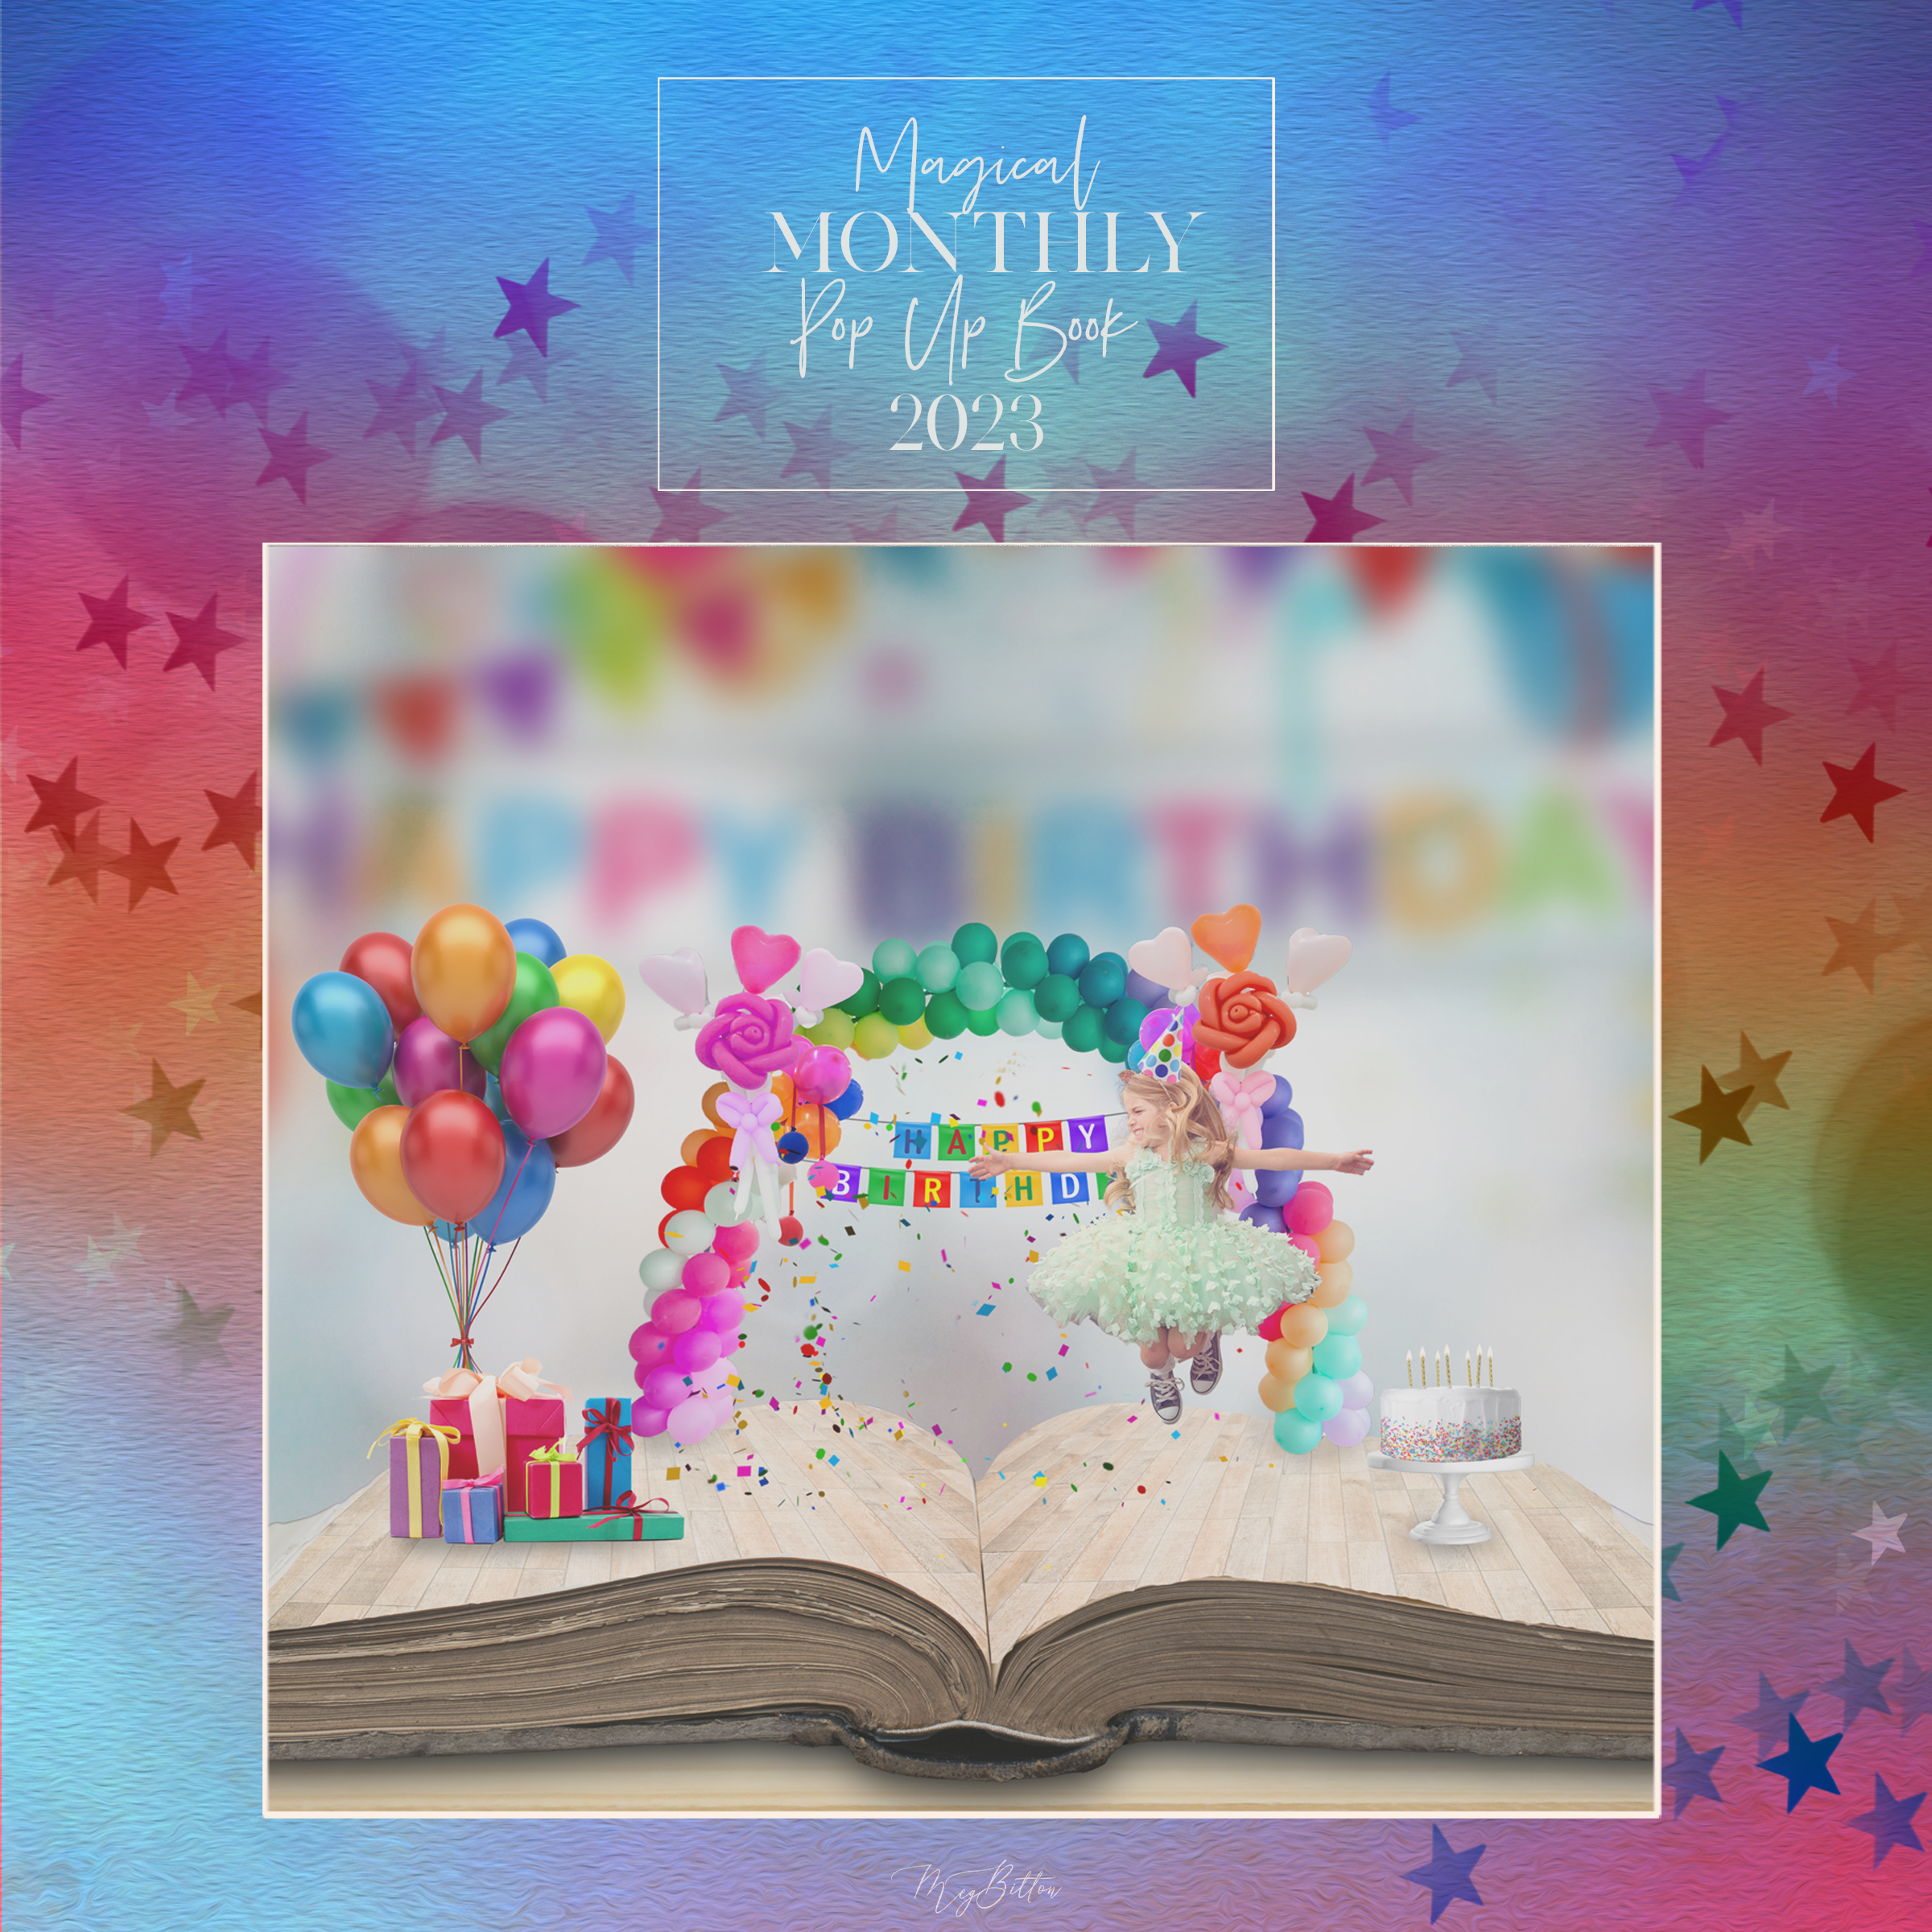 Magical Monthly Pop Up Book 2023 - Meg Bitton Productions